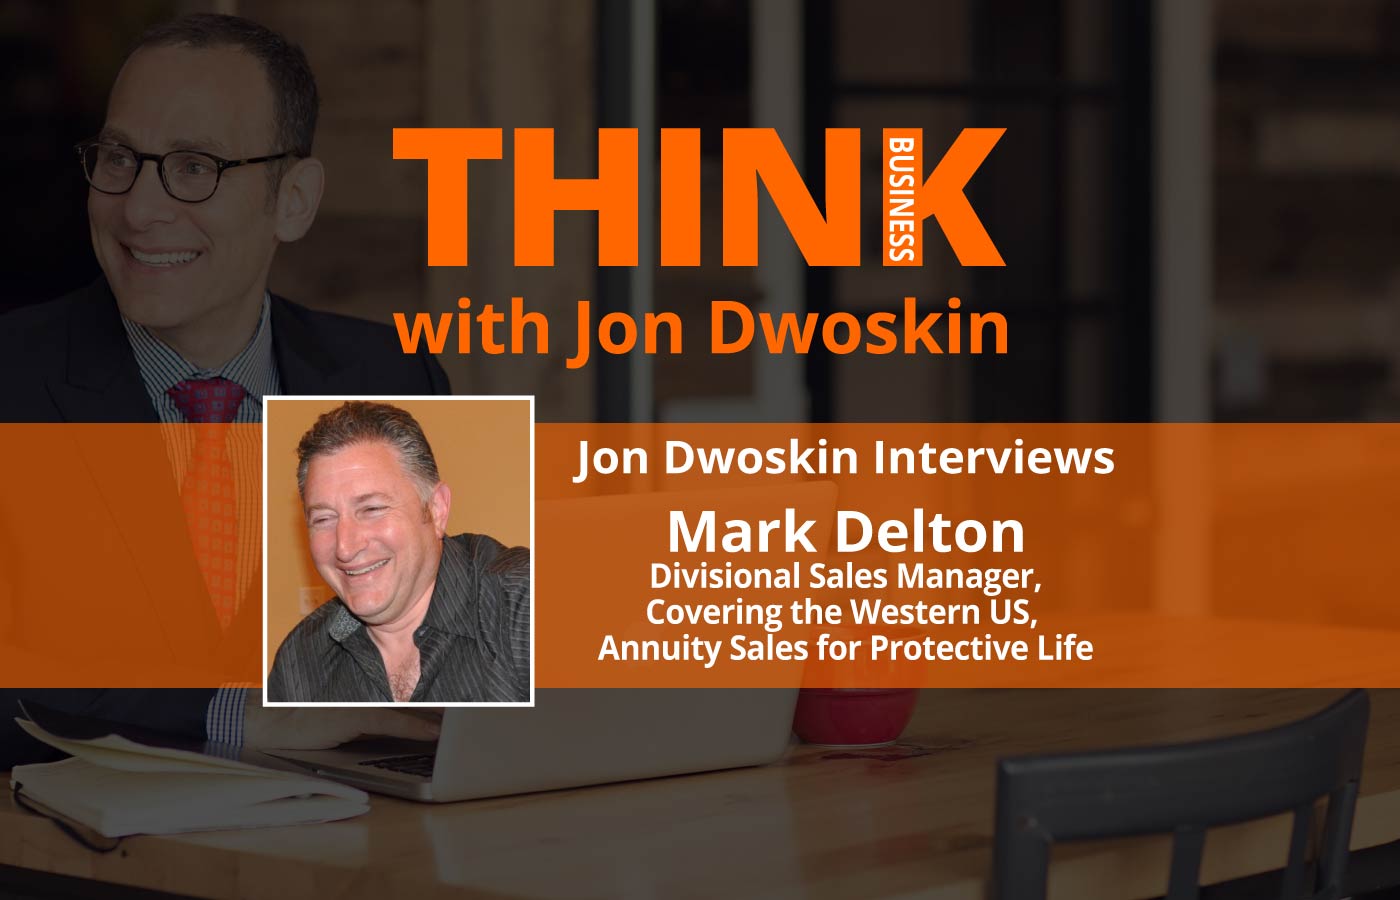 THINK Business: Jon Dwoskin Interviews Mark Delton, Divisional Sales Manager, Covering the Western US, Annuity Sales for Protective Life